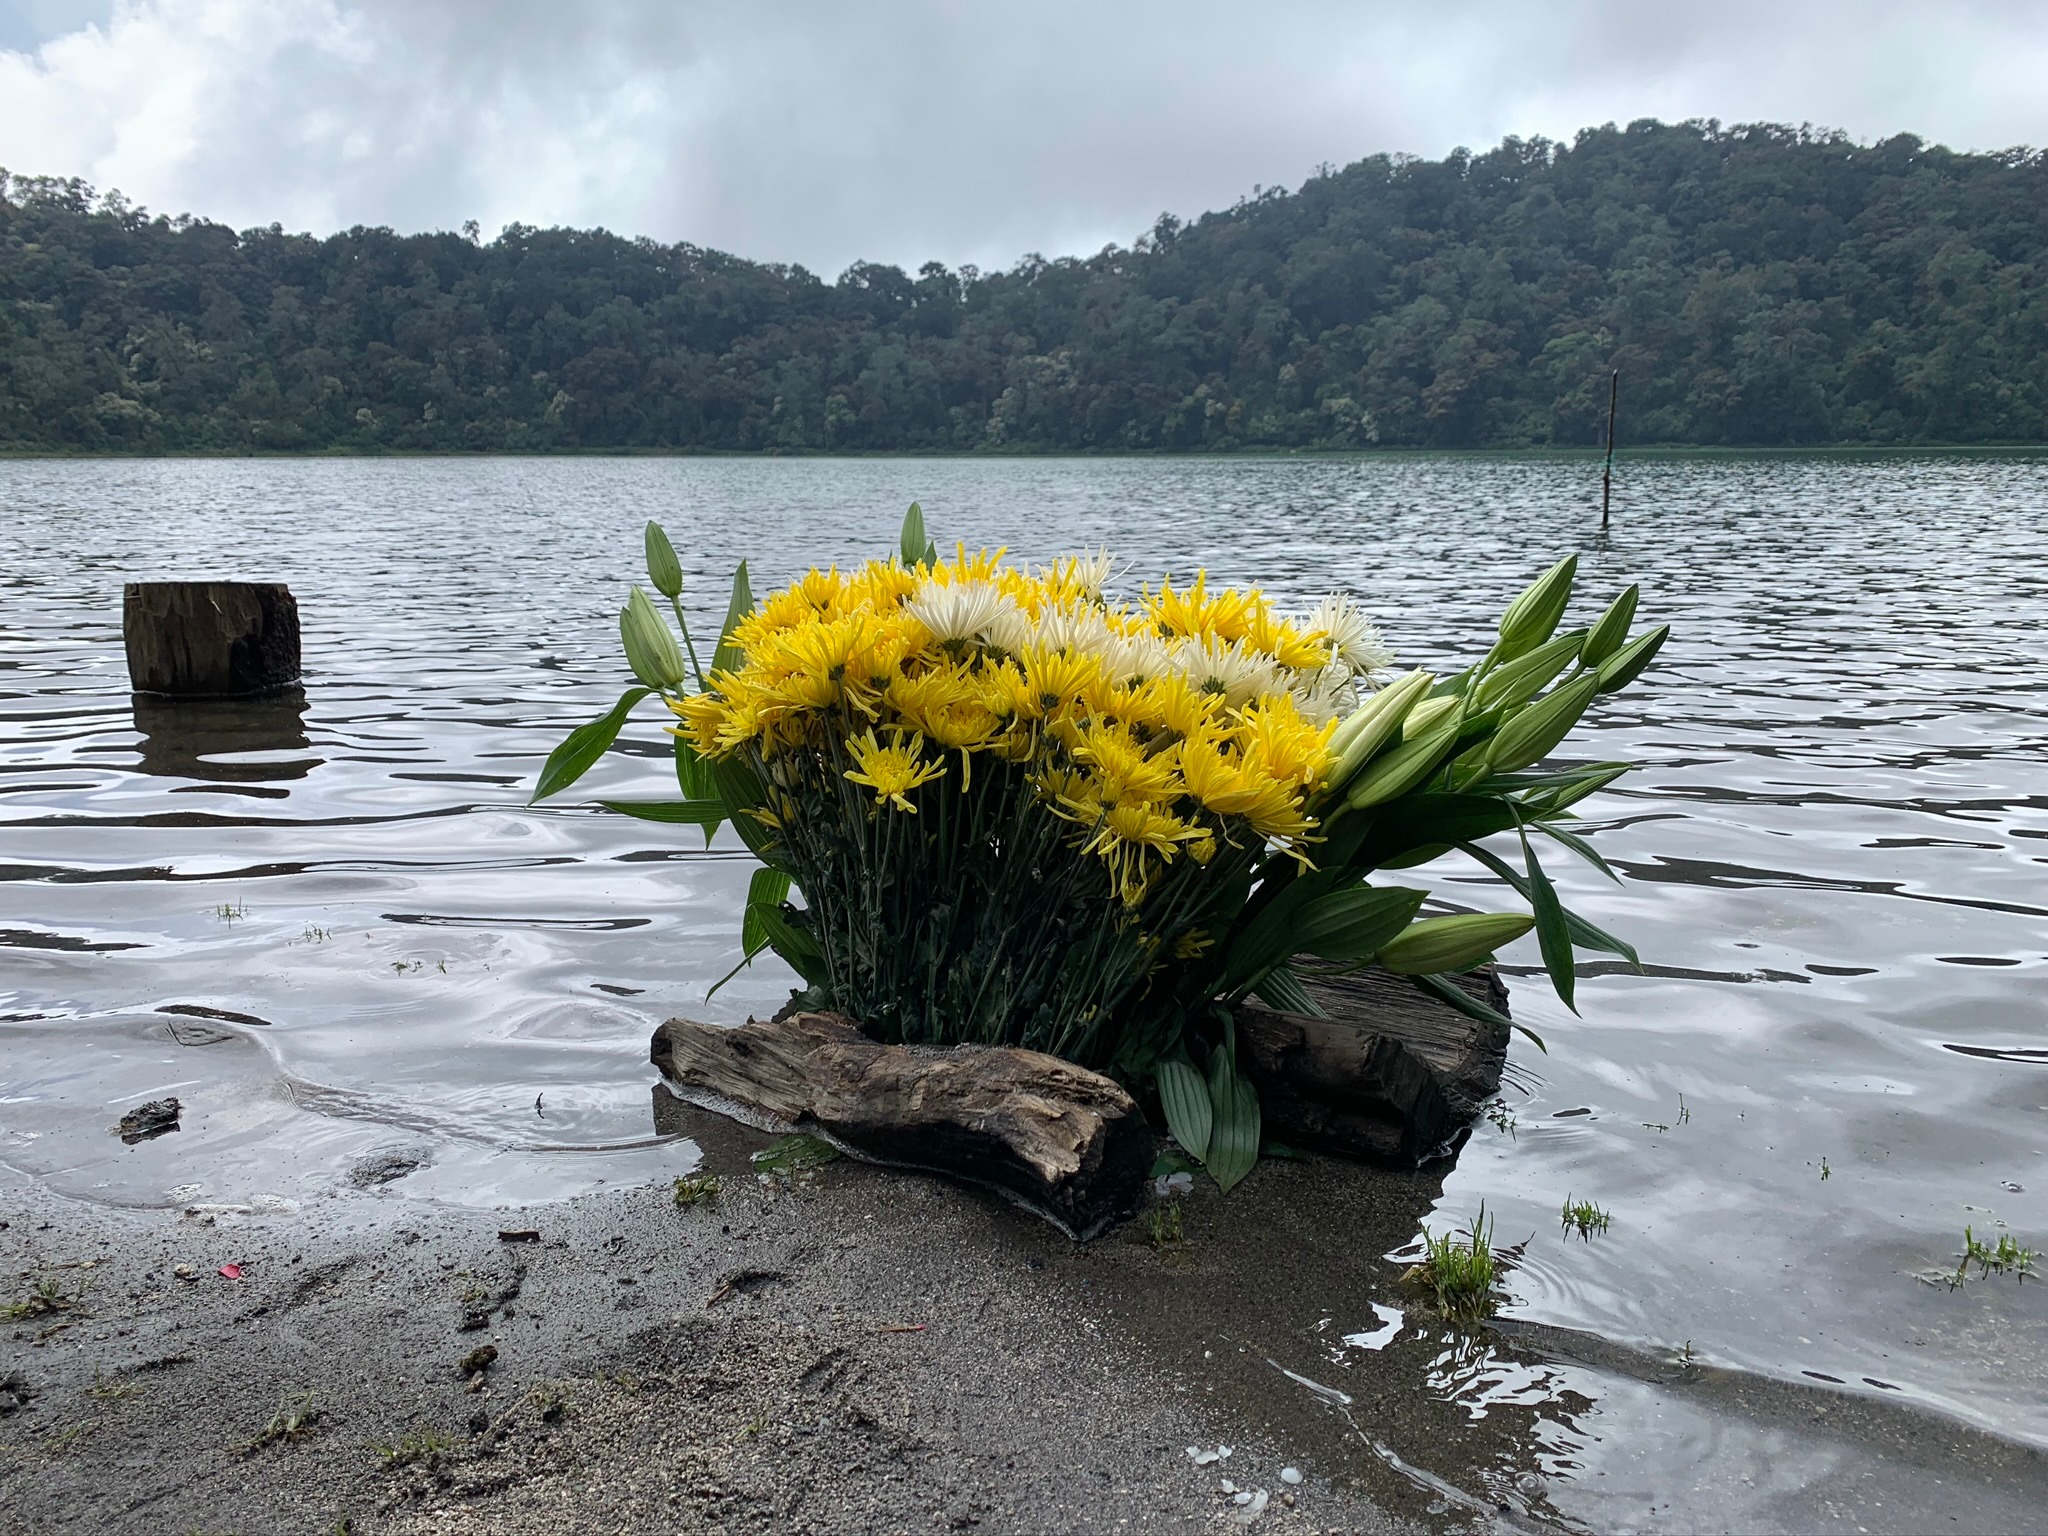  - Flower offering for the Chikabal Lagoon, Guatemala. (Photo Credit: Verónica Sacalxot, Ki’kotemal)